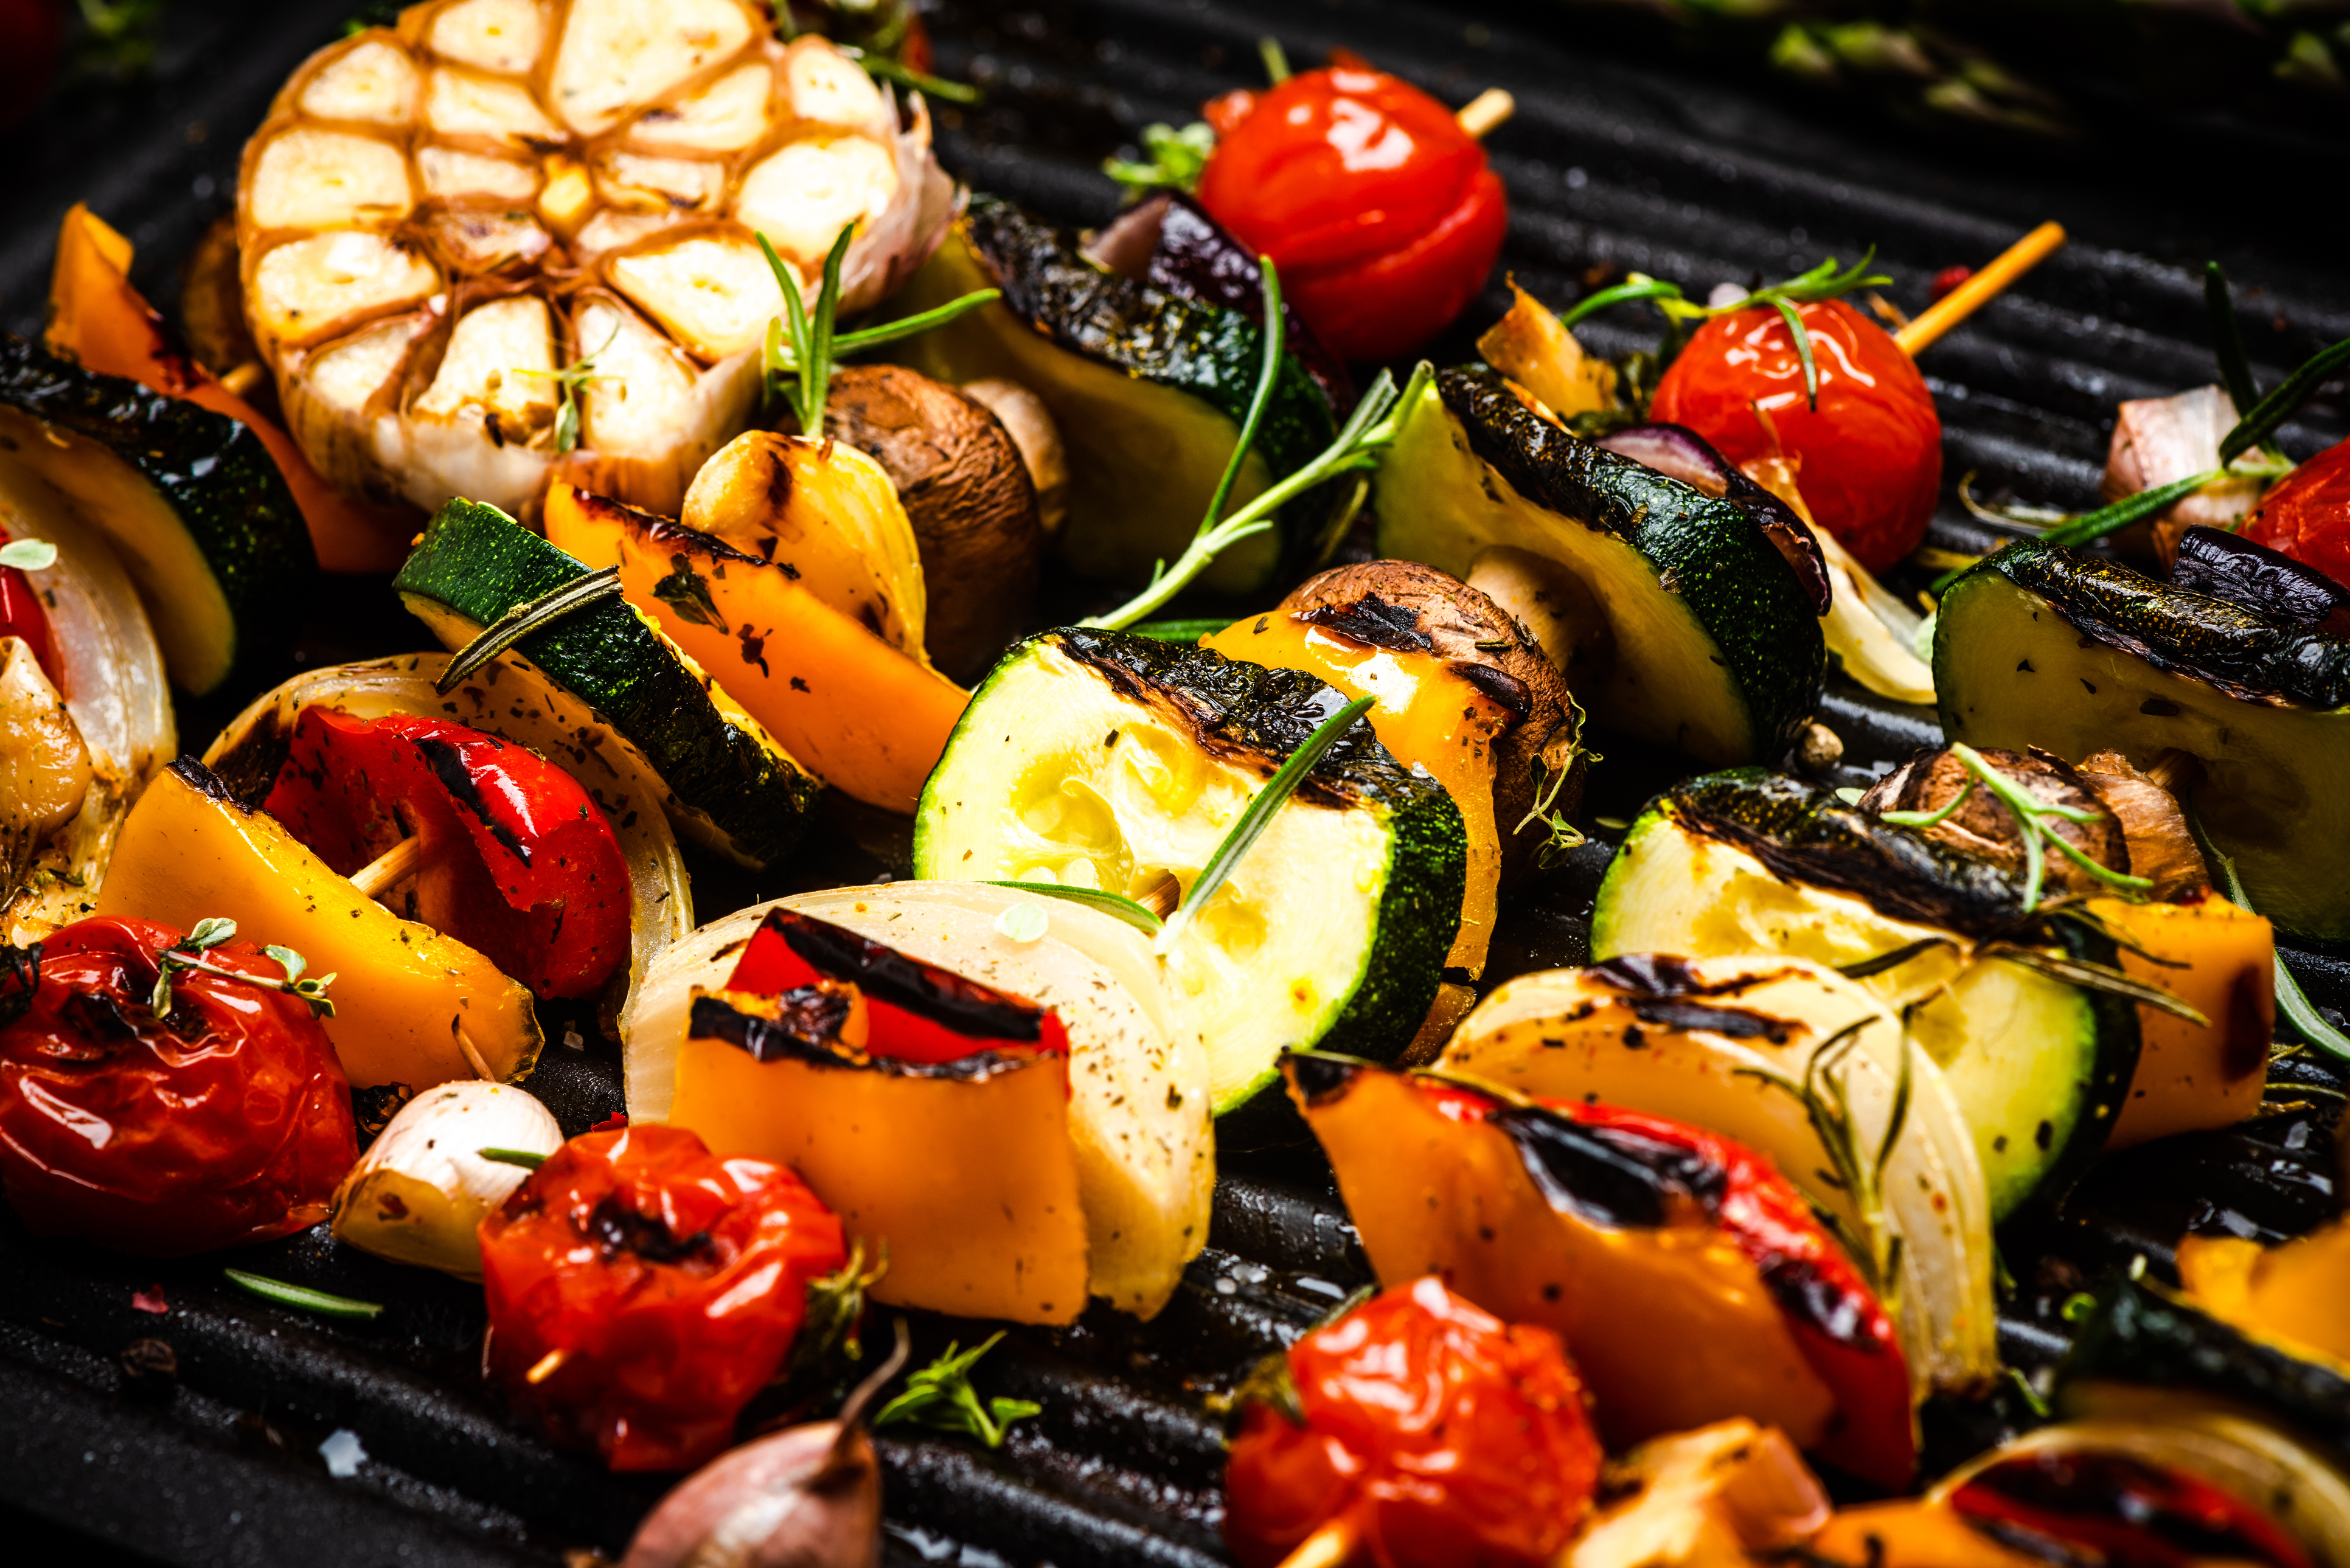 An image of grilled vegetables on skewers, seasoned with herbs, on a BBQ.